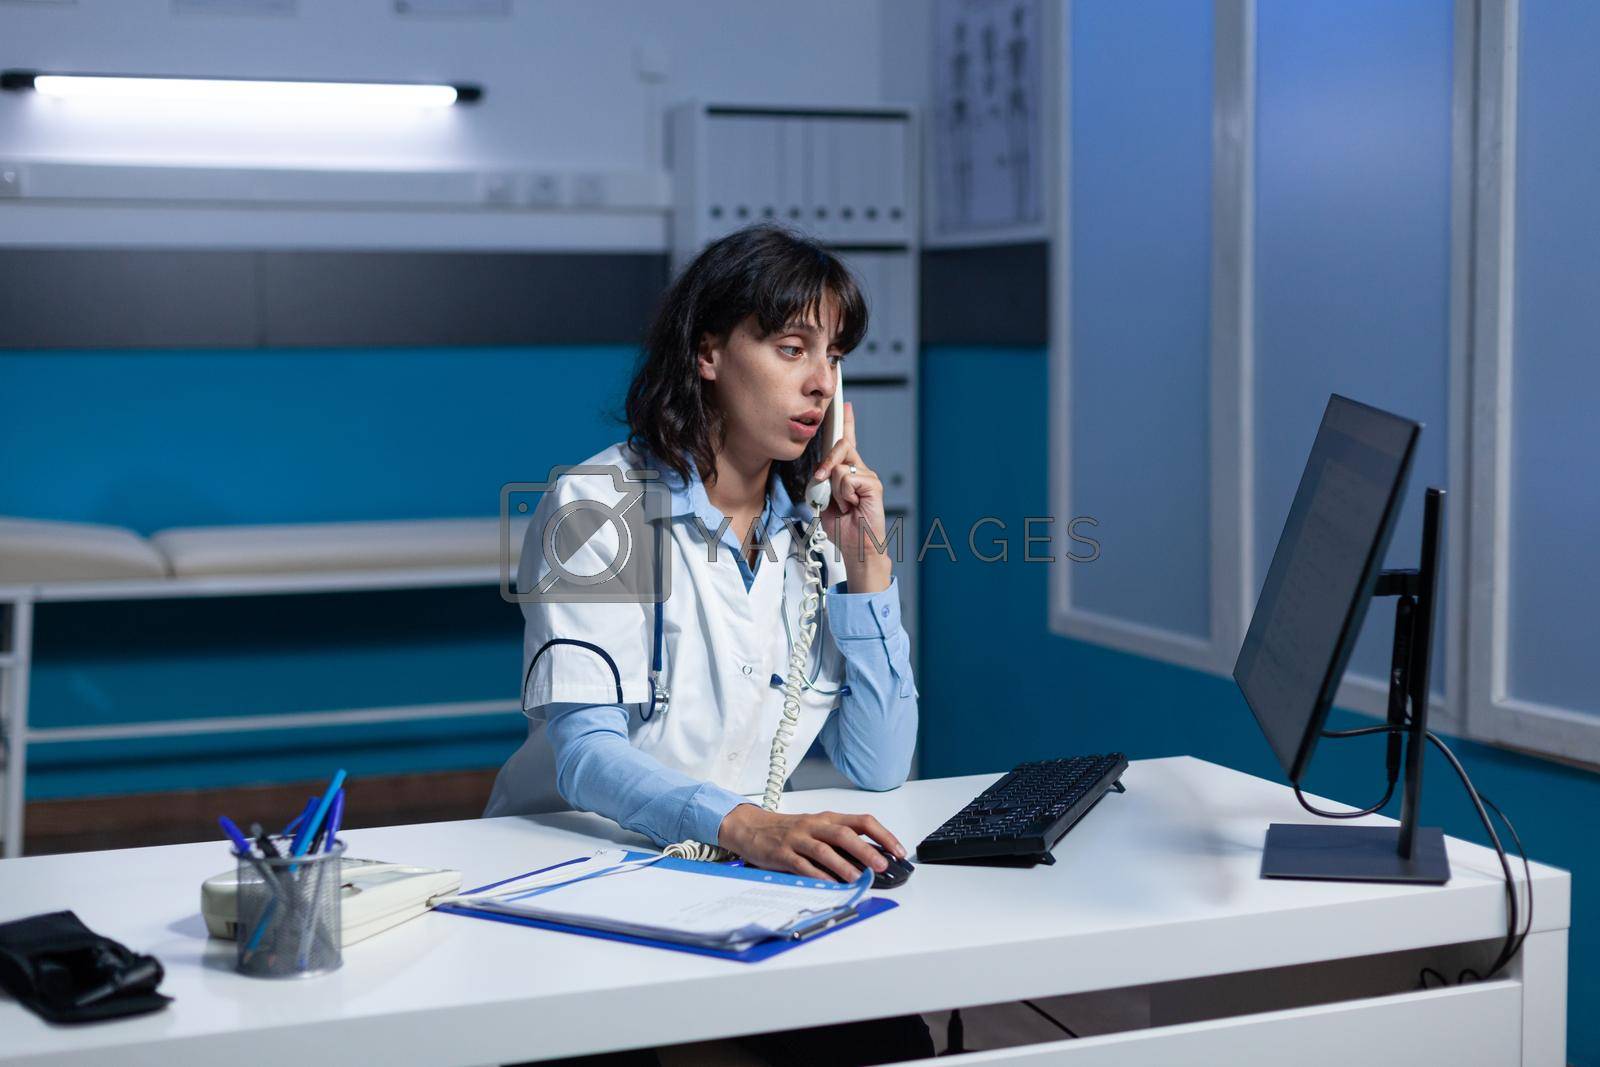 Doctor talking on landline phone for healthcare checkup at medical office. Woman working as medic using telephone for remote conversation about appointment with patient, working late.